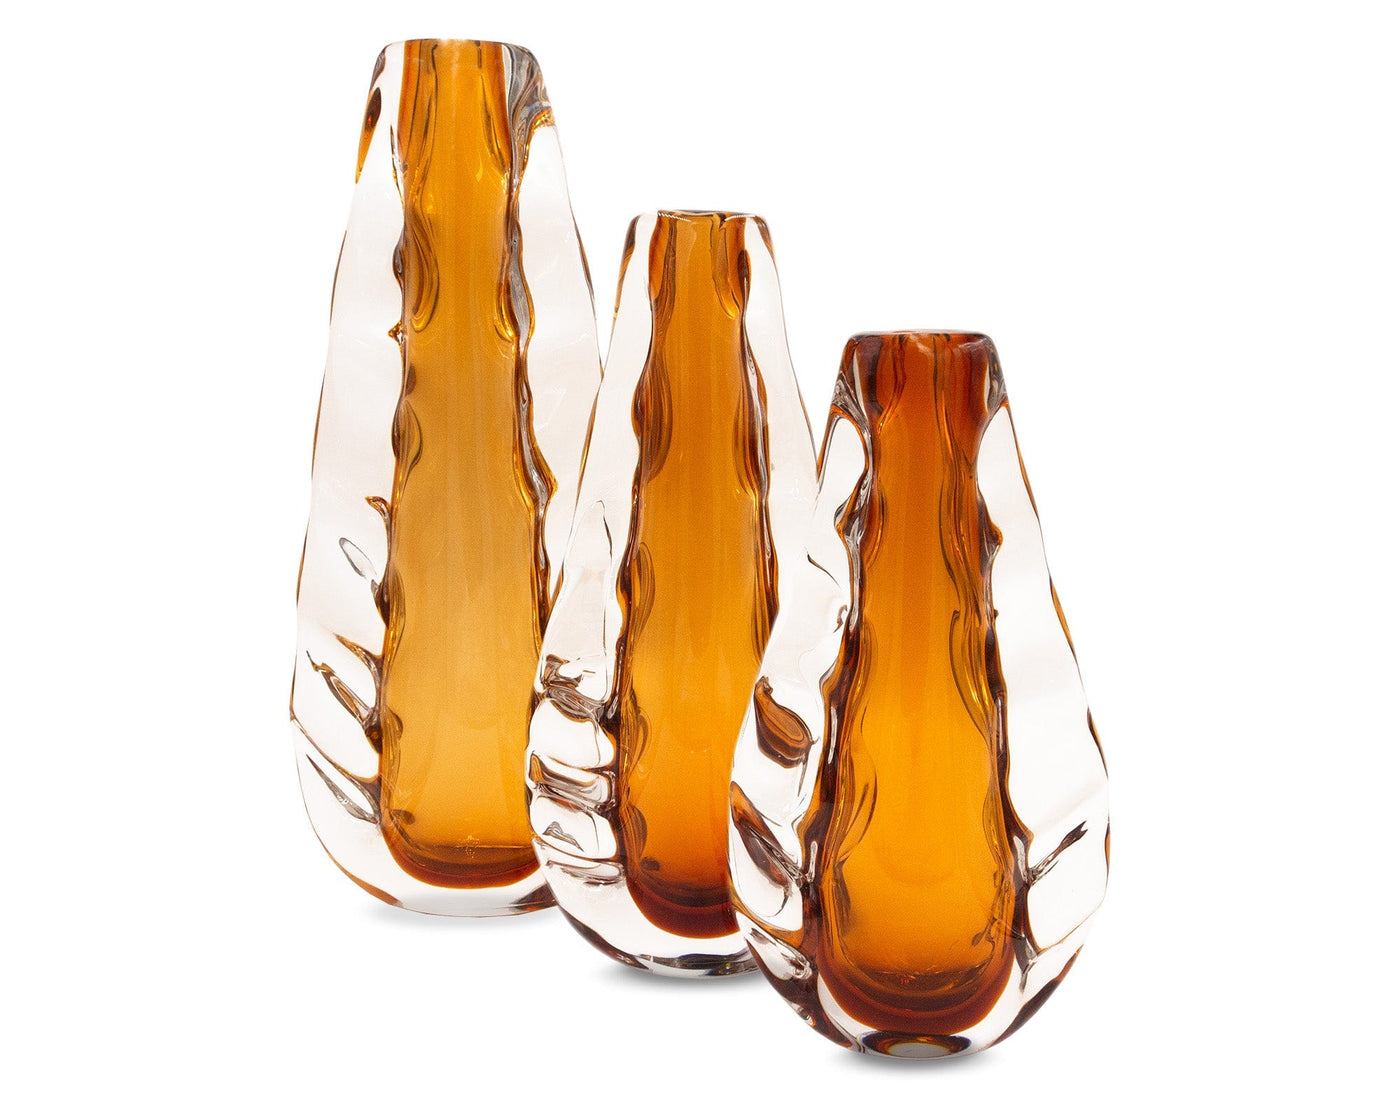 Liang & Eimil Accessories Astell Crystal Amber Vase - Medium House of Isabella UK